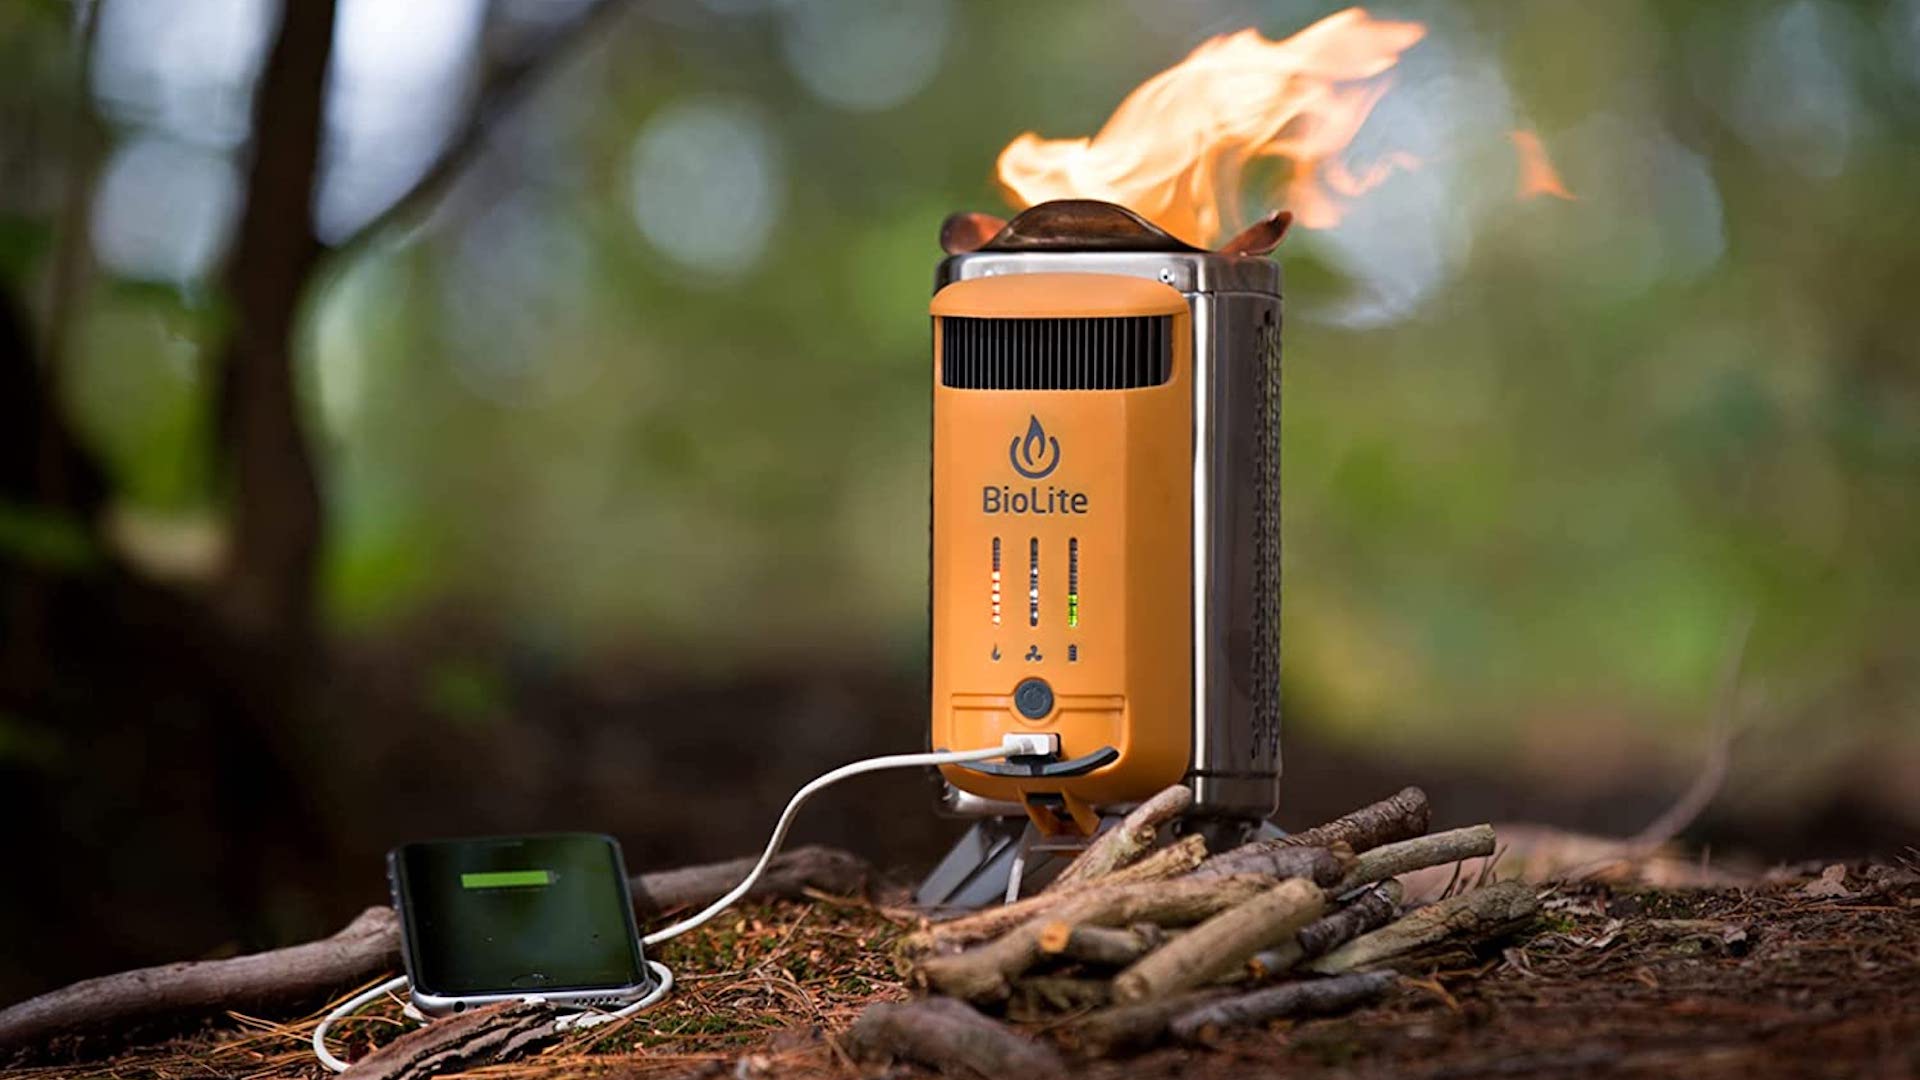 11 clever camping gadgets for your camping adventures